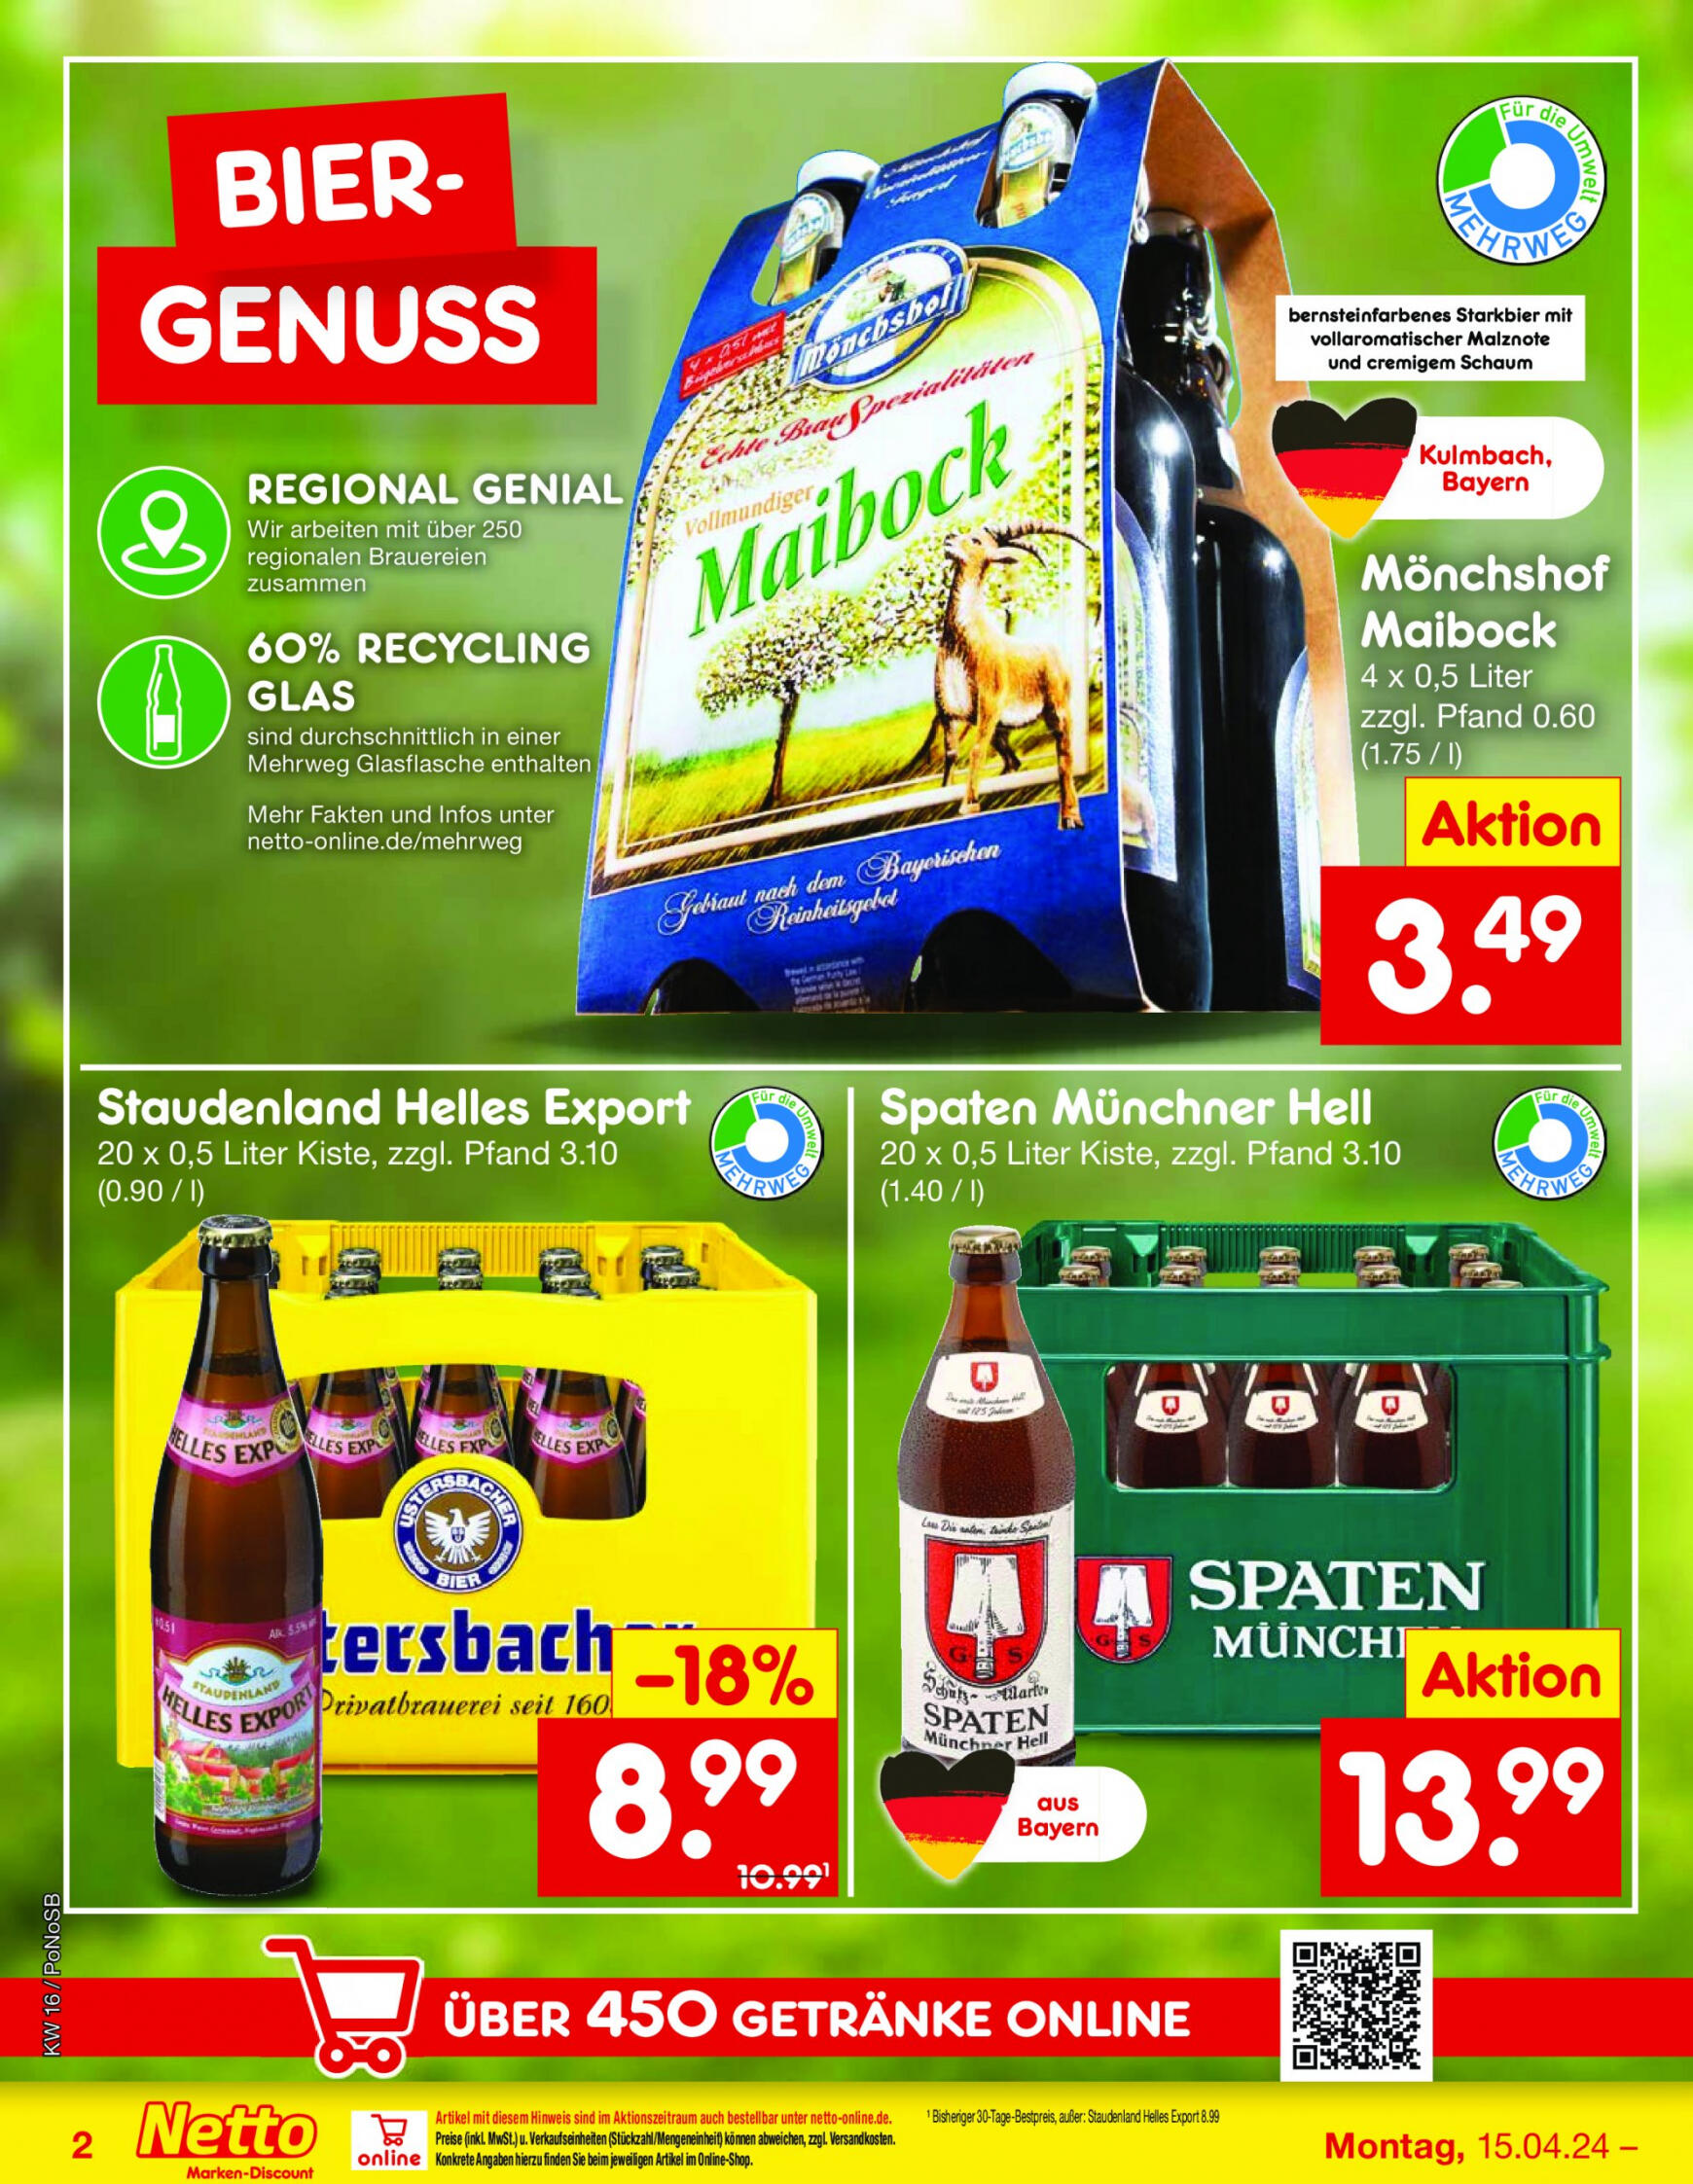 netto - Flyer Netto aktuell 15.04. - 20.04. - page: 22